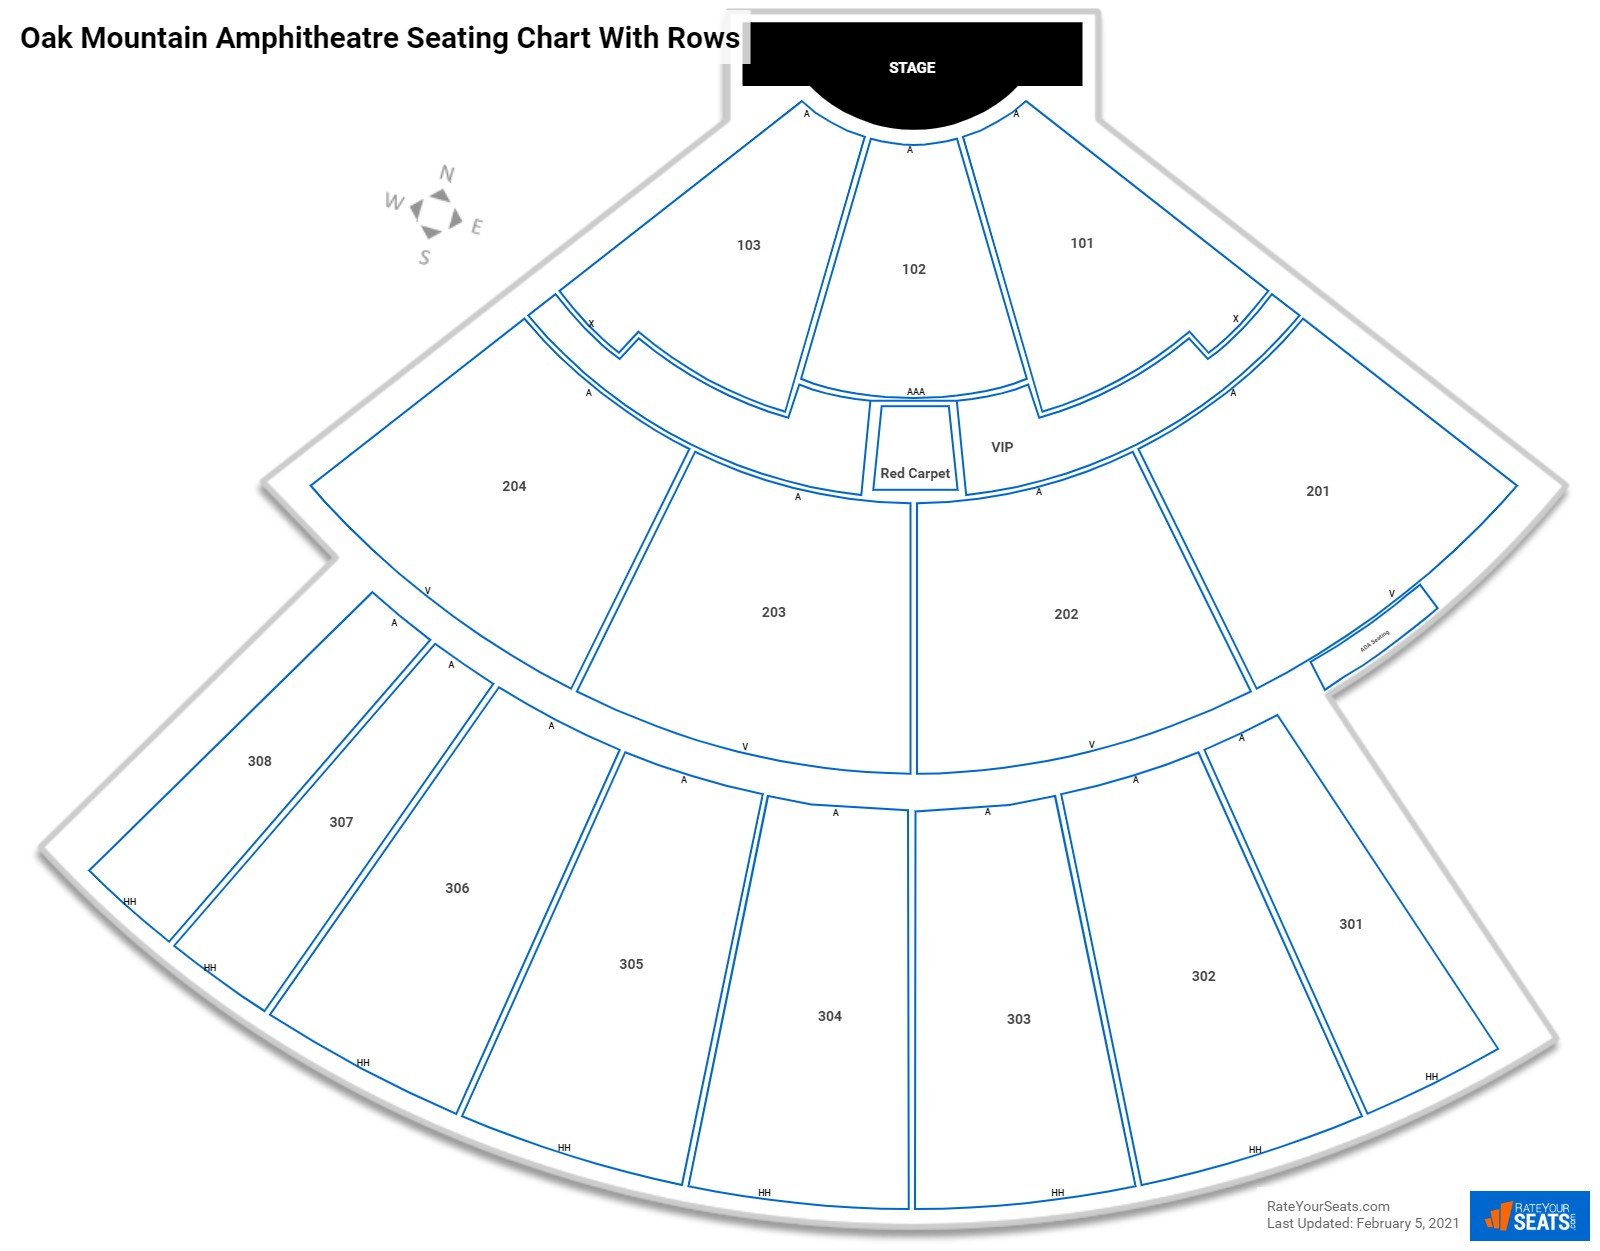 Oak Mountain Amphitheatre seating chart with row numbers